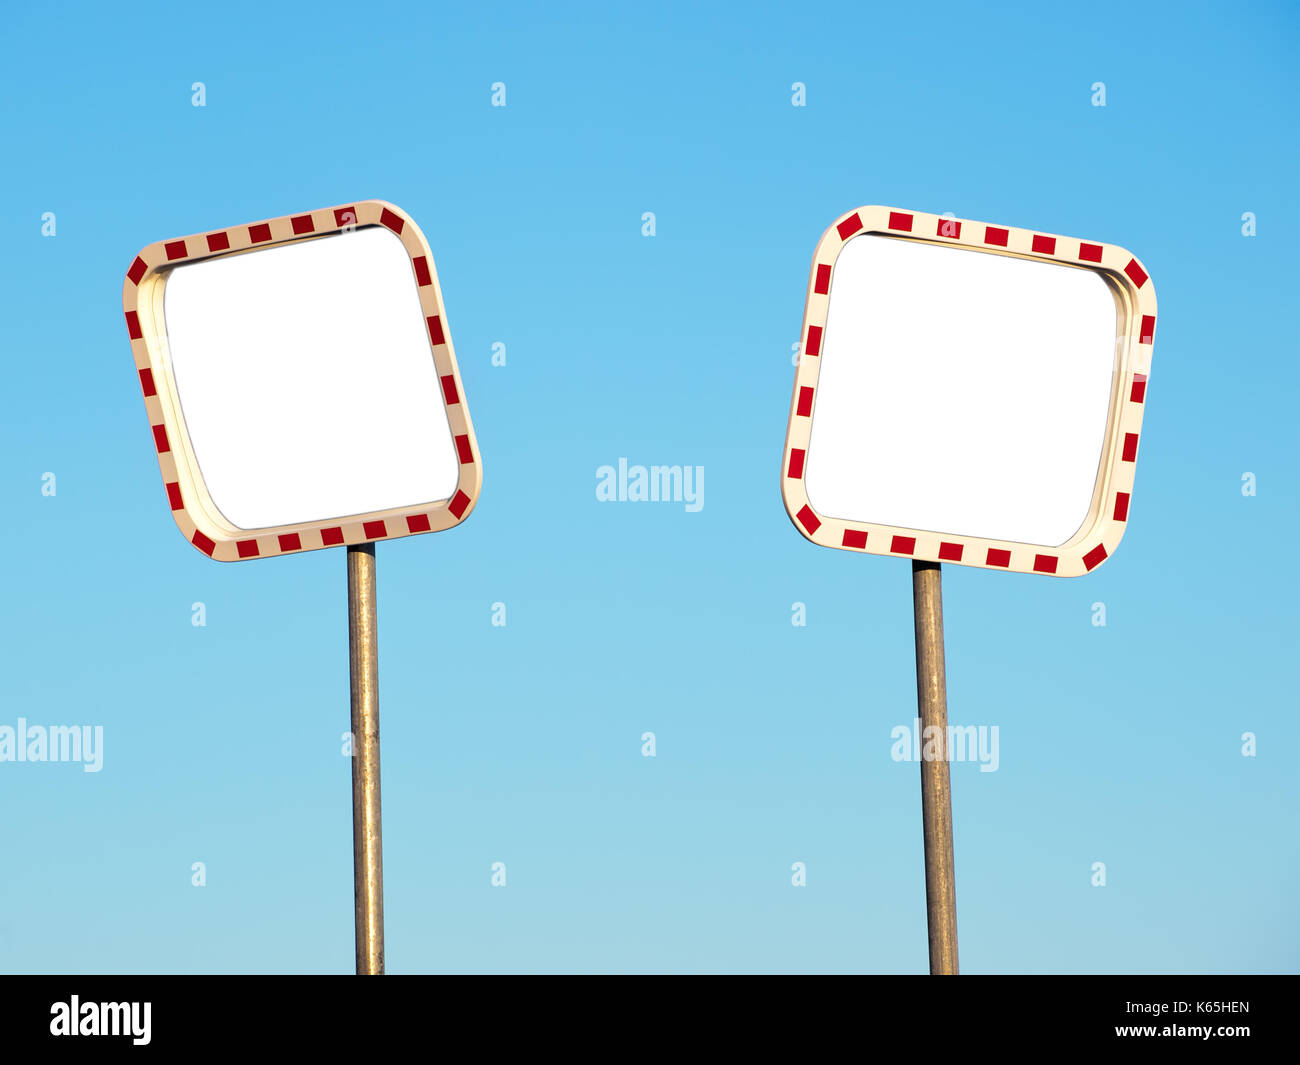 Two blank road mirrors on a blue sky background. Stock Photo